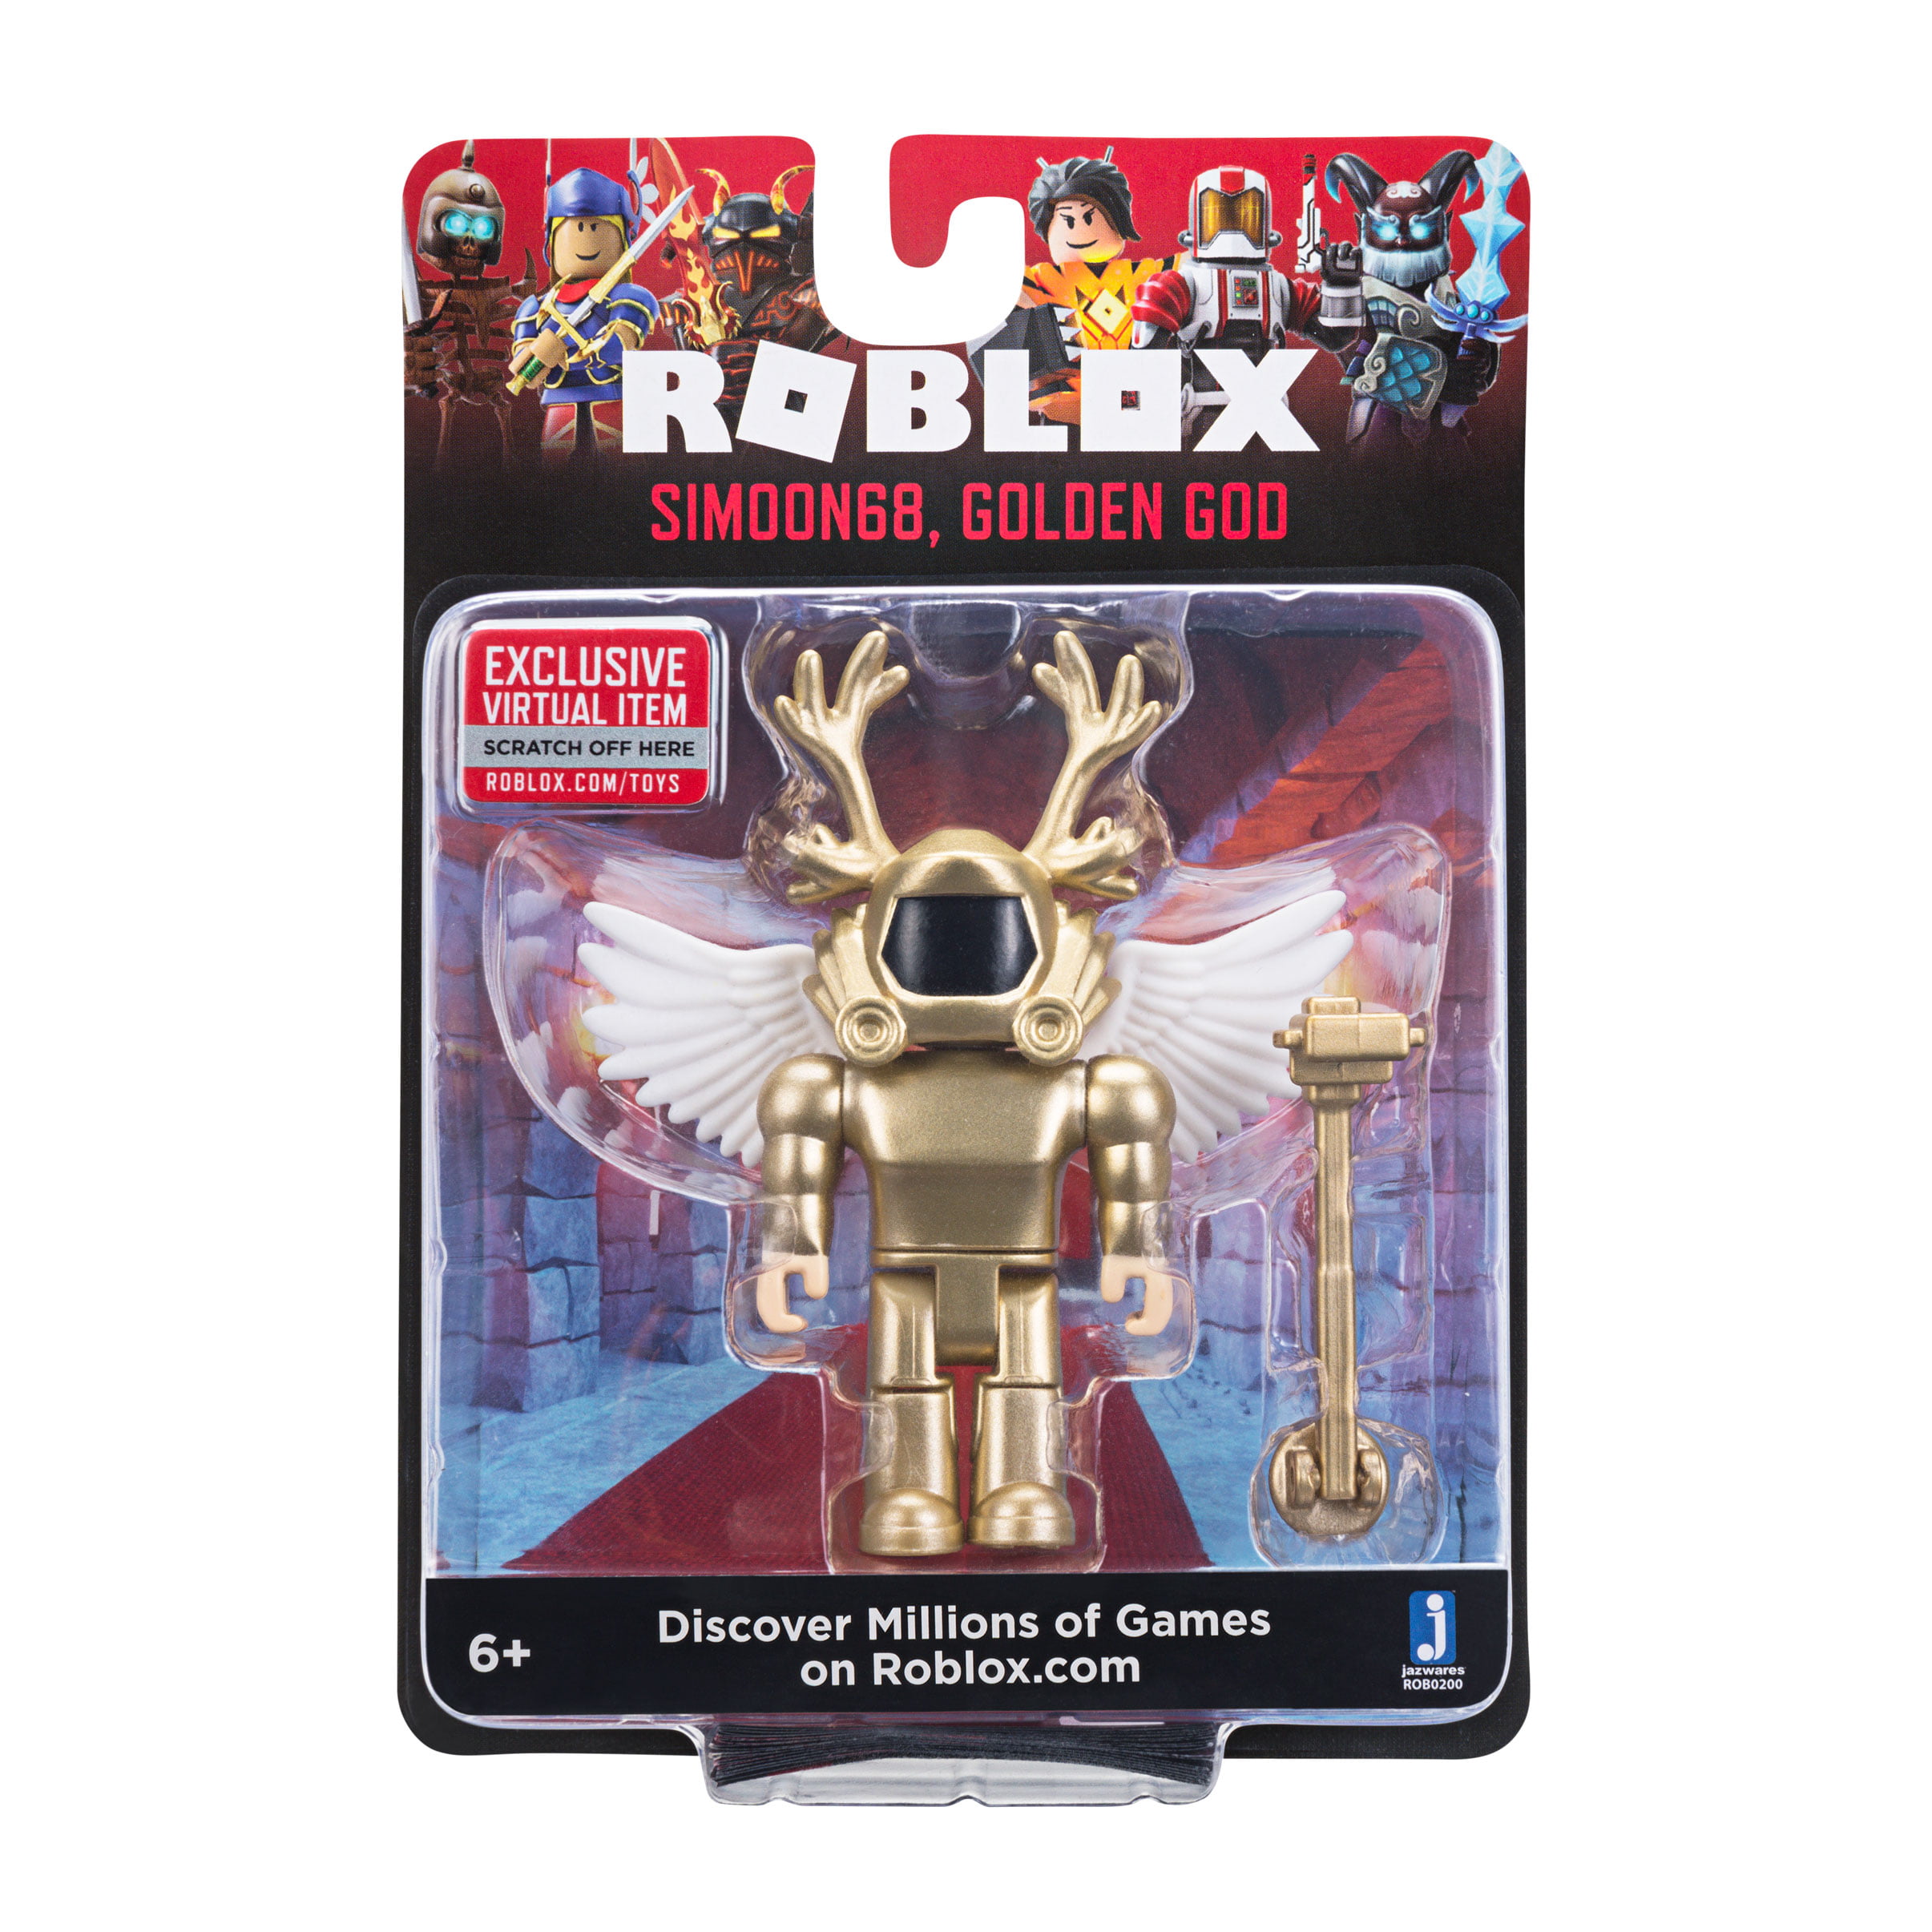 Roblox Action Collection Simoon68 Golden God Figure Pack Includes Exclusive Virtual Item Walmart Com Walmart Com - roblox mount of the gods toy